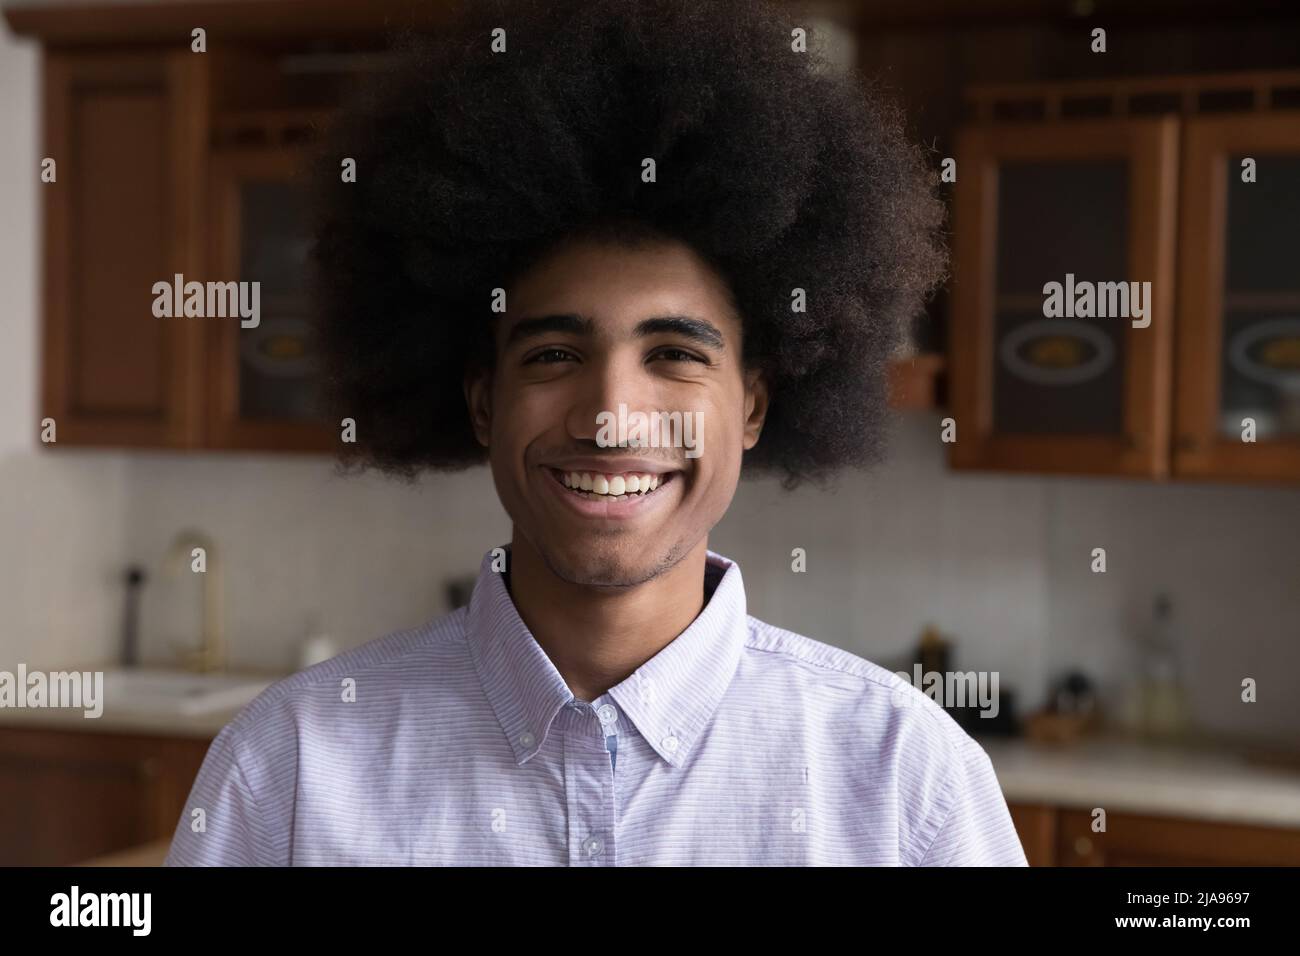 Young Black male look at camera with confident broad smile Stock Photo